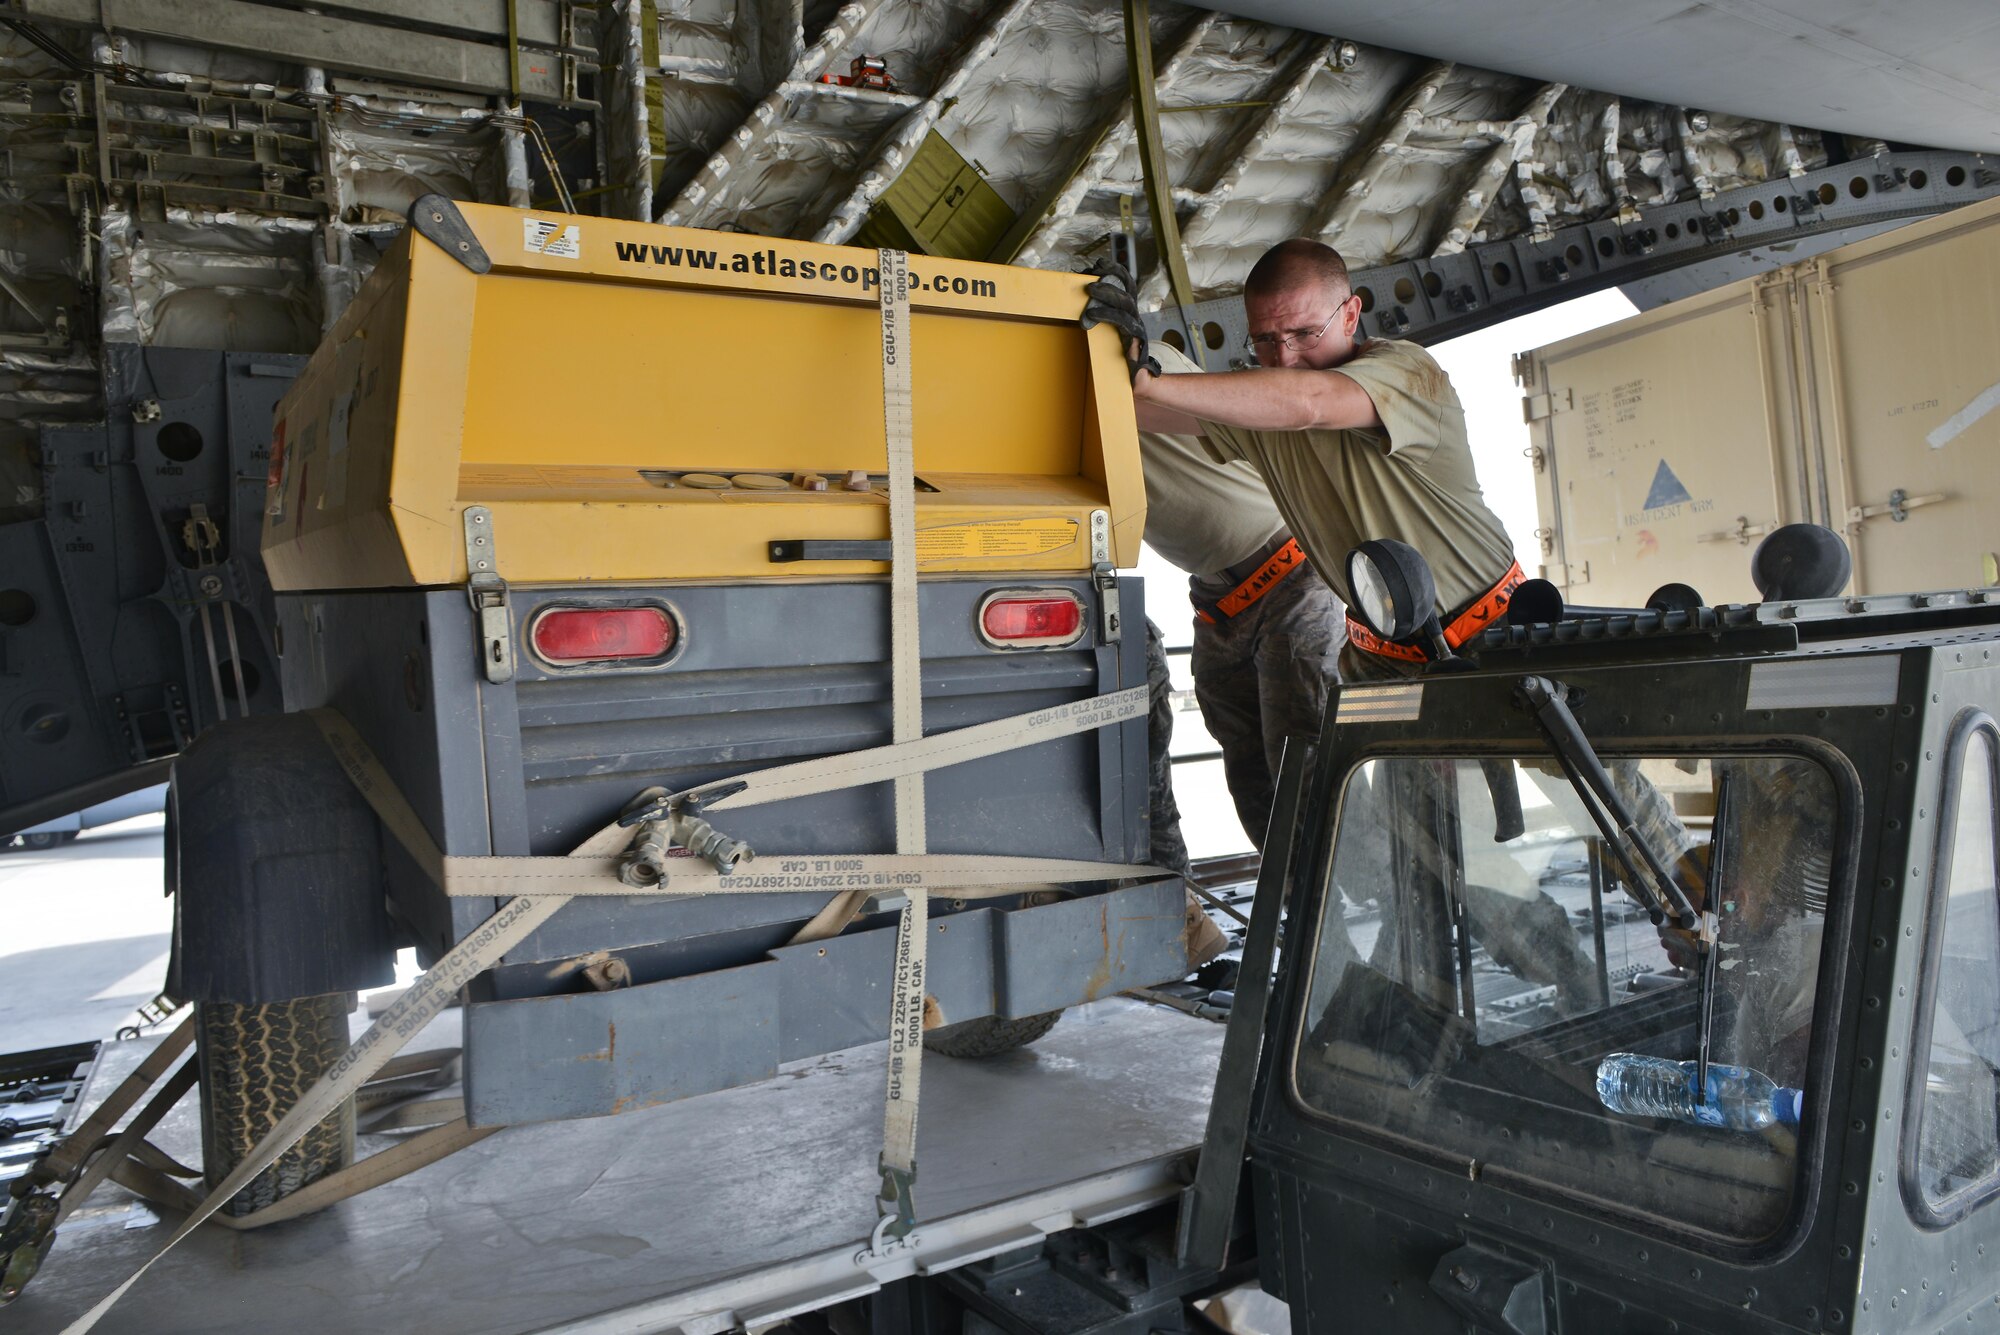 Airmen from the 8th Expeditionary Air Mobility Squadron load generators onto a C-17 Globemaster aircraft prior to take off May 13, 2015 at Al Udeid Air Base, Qatar. Airmen from separate squadrons deployed to Al Udeid helped support a mission for forward deployed members of RED HORSE Civil Engineering to repair a runway in Southwest Asia in support of Operation Inherent Resolve. (U.S. Air Force photo/Staff Sgt. Alexandre Montes)